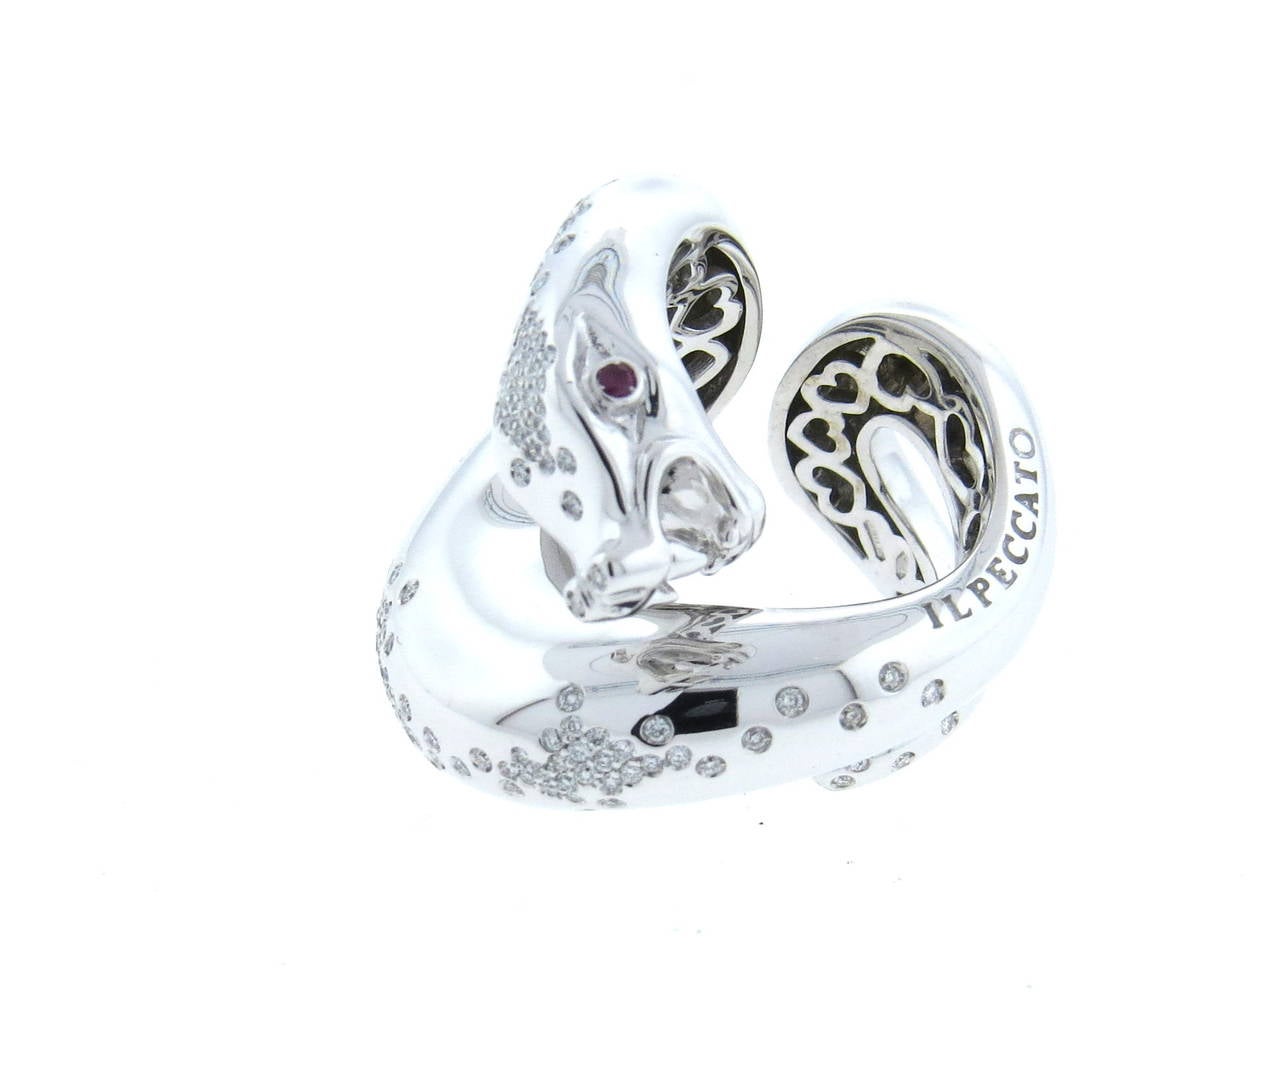 Pasquale Bruni 18k white gold snake ring from Il Peccato collection, set with approx. 0.93ctw in diamonds and two ruby eyes. Ring is a size 6 1/2, ring top is 28mm wide. Marked Pasquale Bruni,Il Peccato, 750 and Italian hallmark. weight of the piece